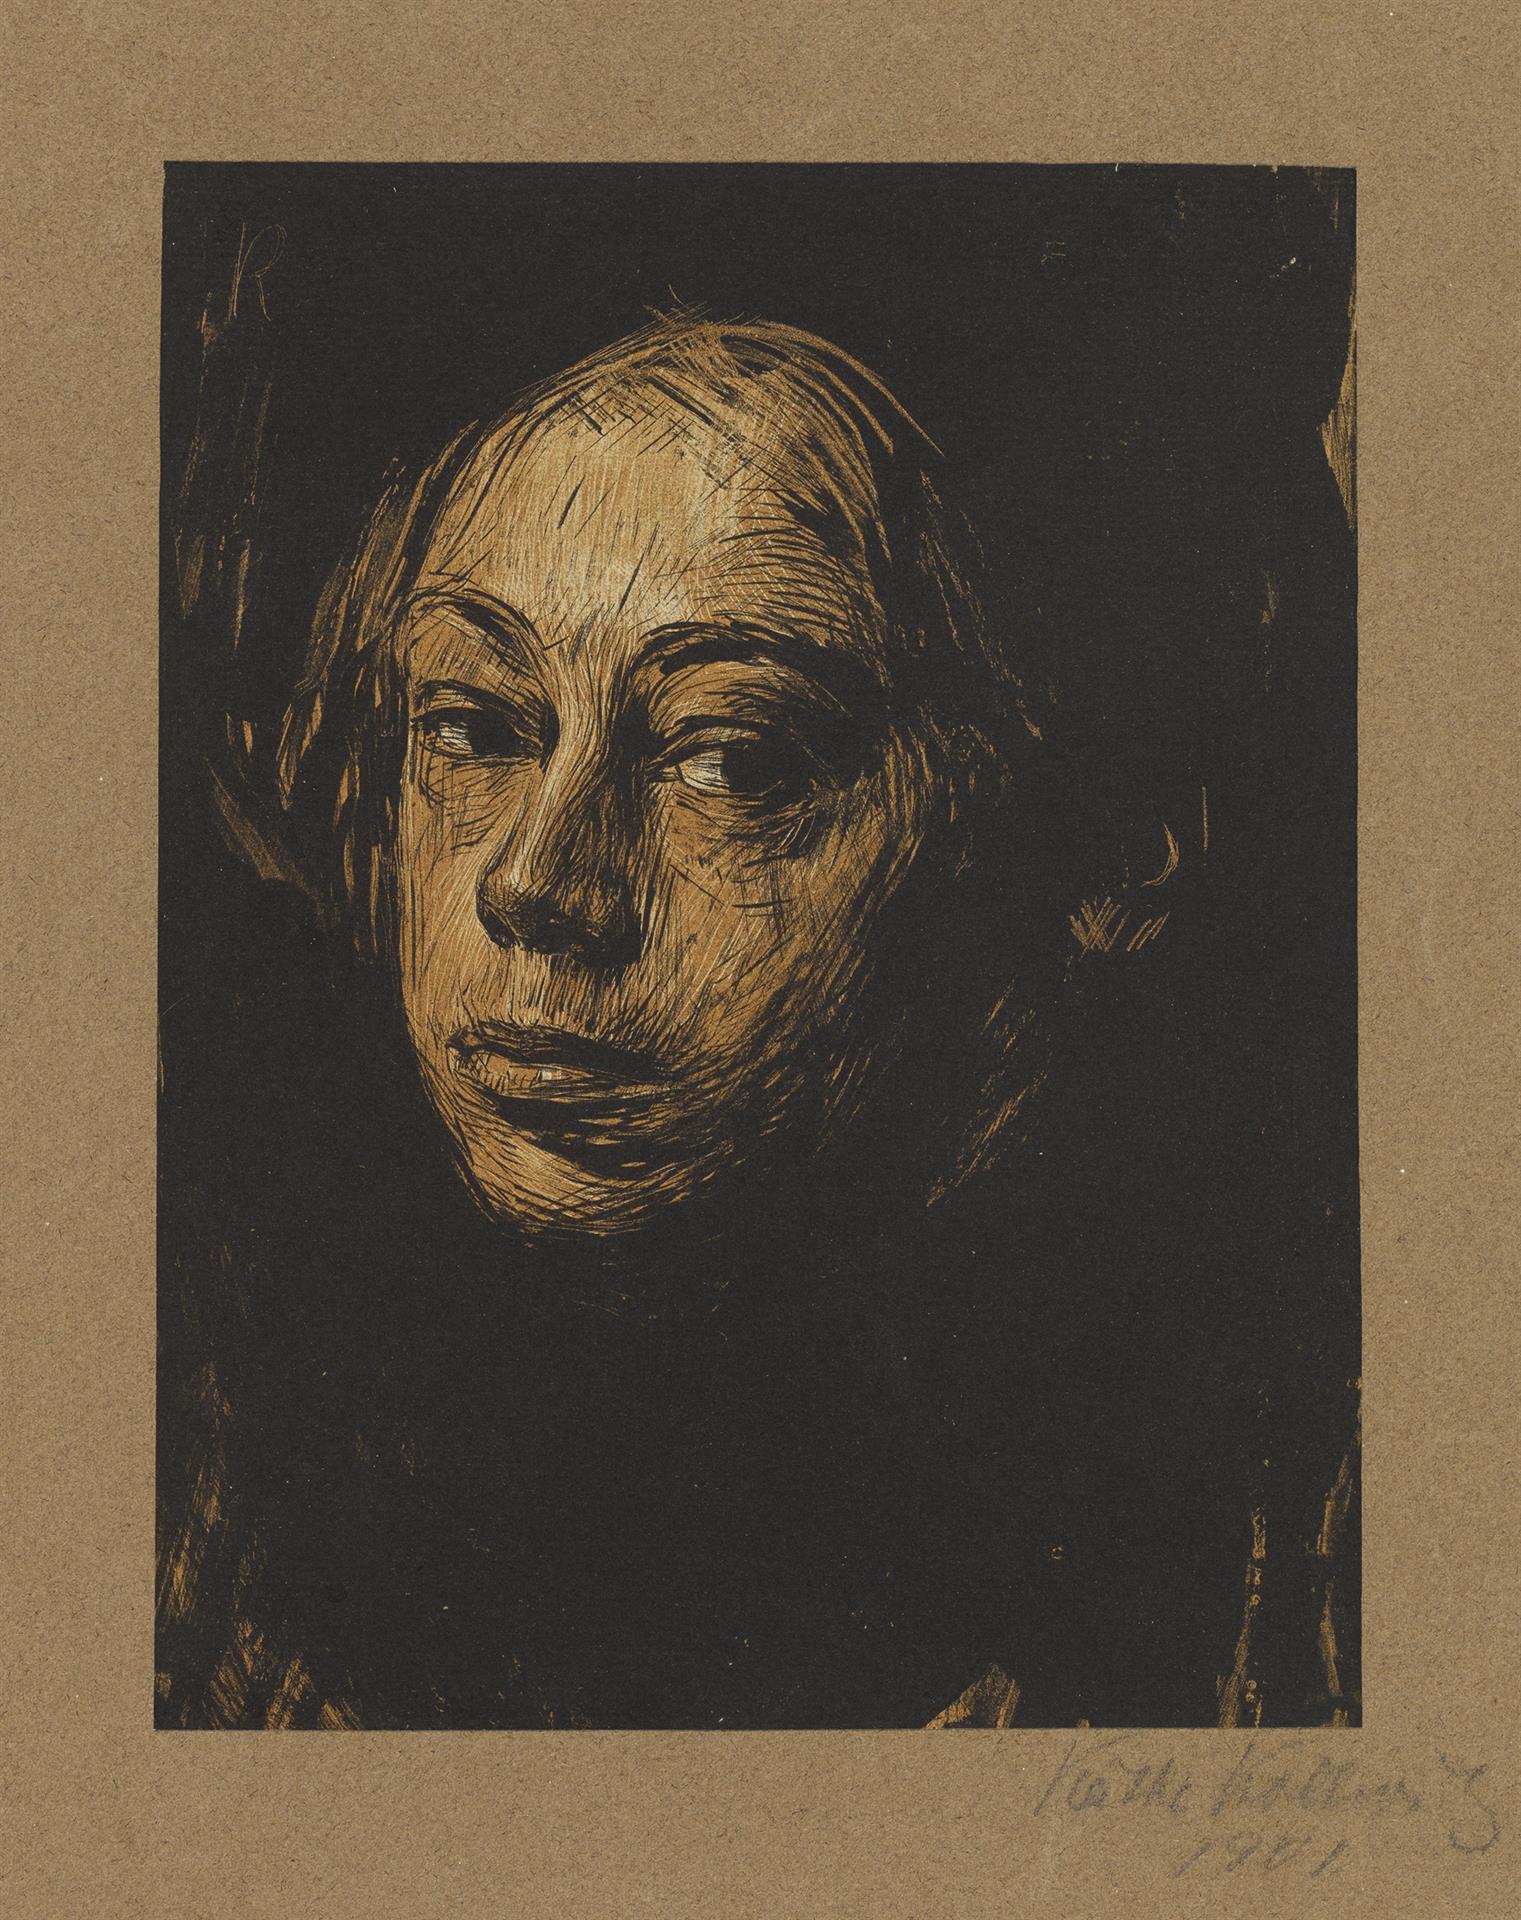 Käthe Kollwitz, Self-portrait towards left, 1901, brush and pen lithograph in two colors with scratch technique in the drawing stone and in the tone stone, printed in brown Kn 52 I, Cologne Kollwitz Collection © Käthe Kollwitz Museum Köln